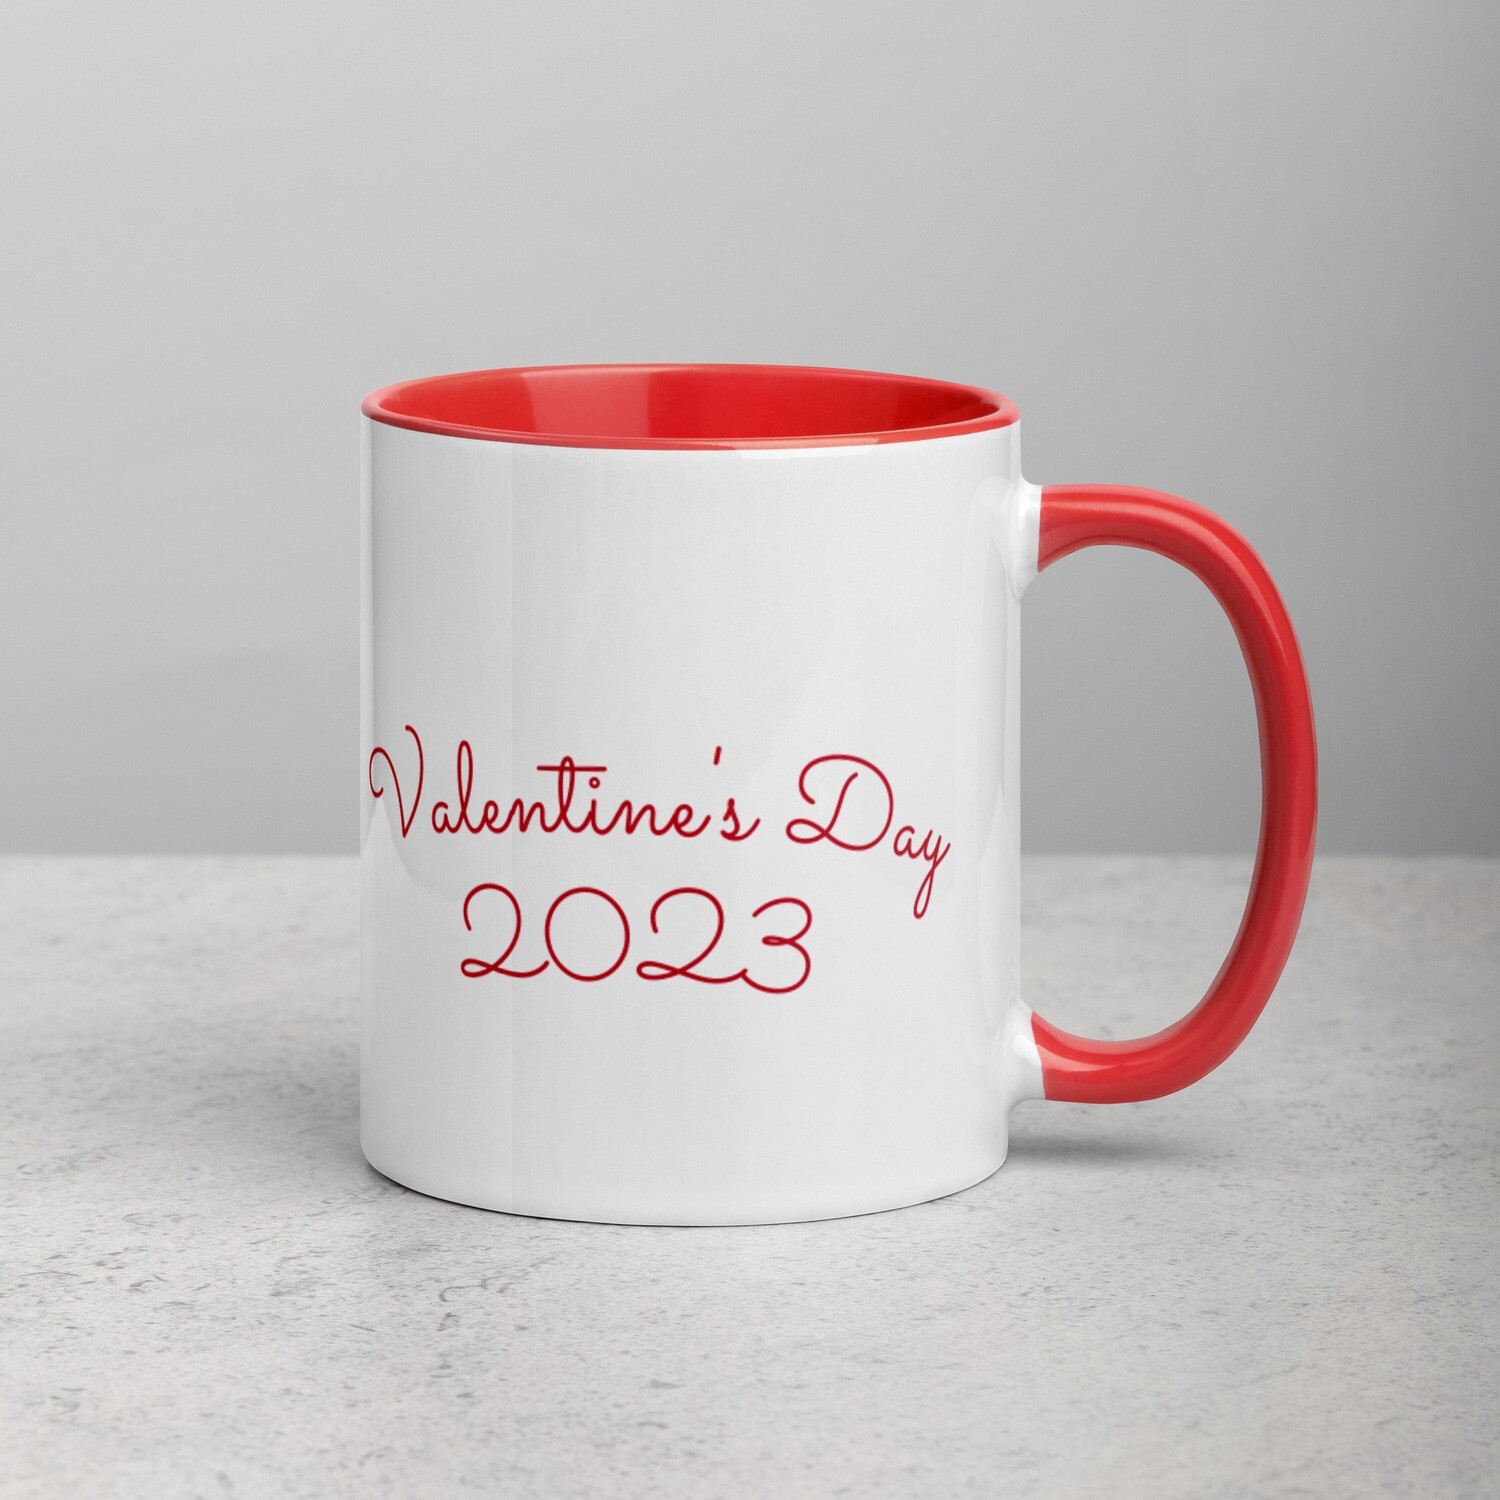 Valentine's Day Christian Coffee Mug with Red Color Inside & On The Handle